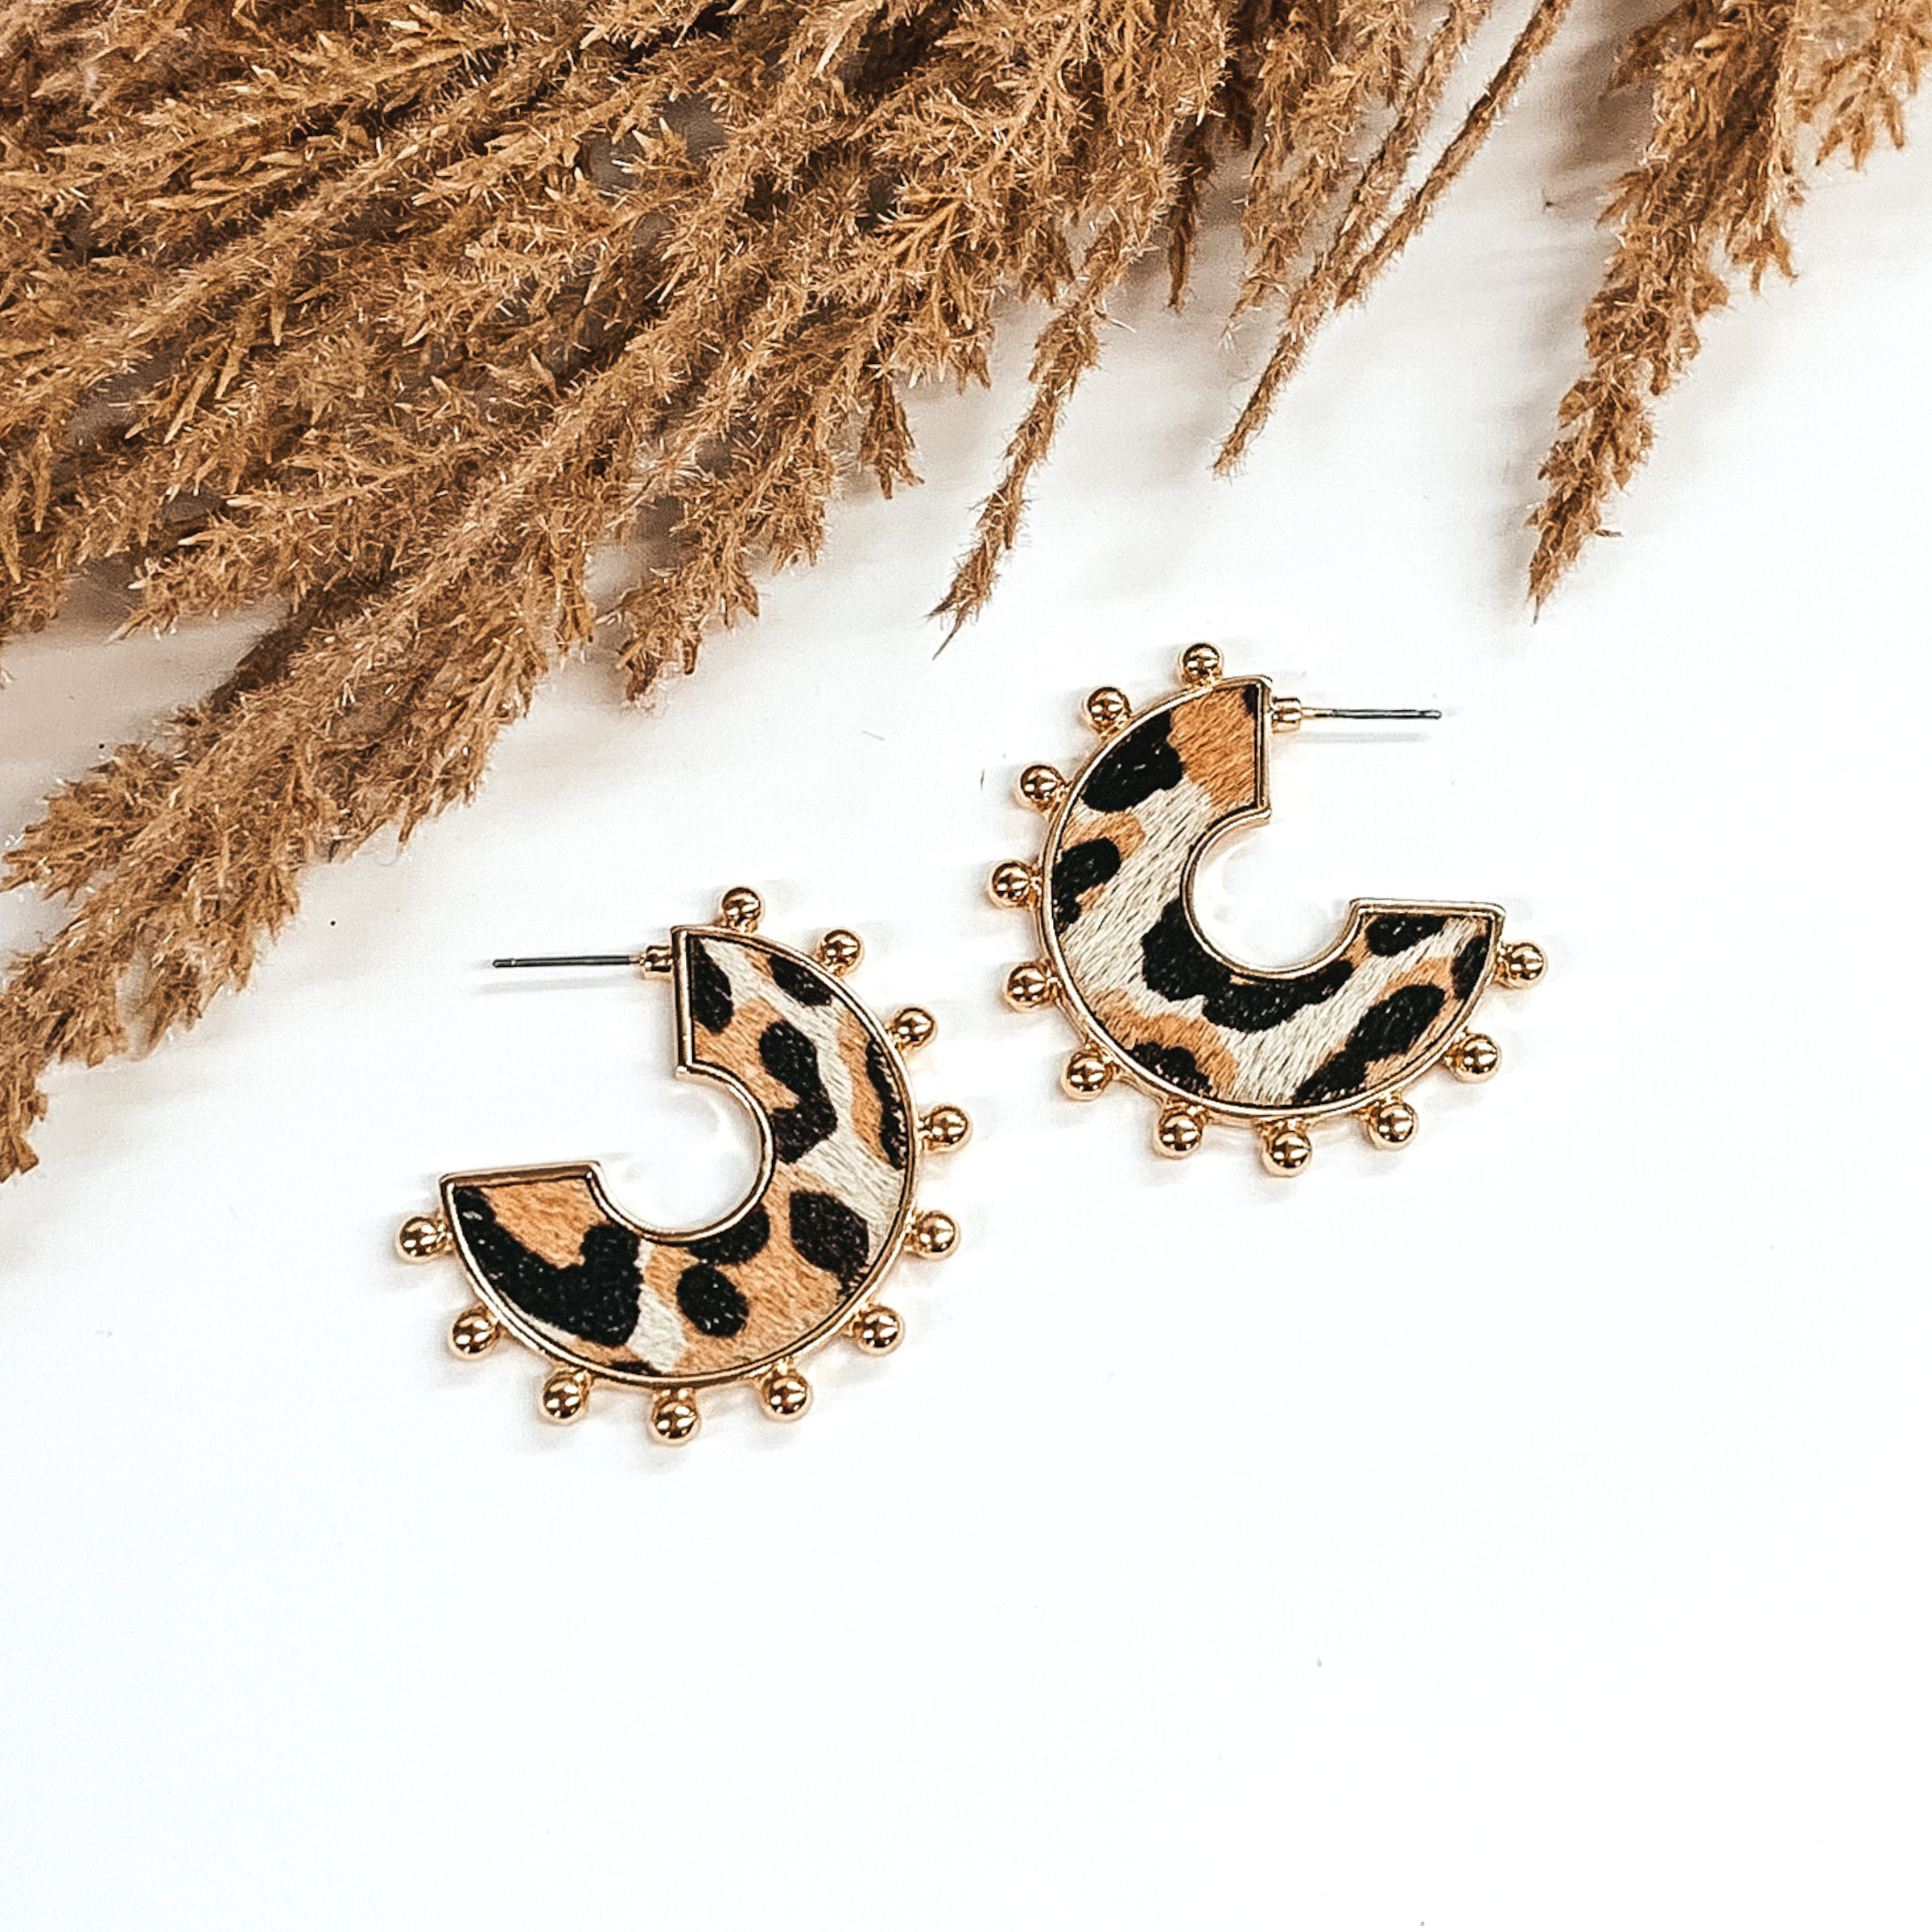 Flat hoops with white animal hide inlay with black and brown animal print pattern. These hoops have gold beads on the edge of the earrings. These earrings are pictured o  white background with tan floral at the top of the page.